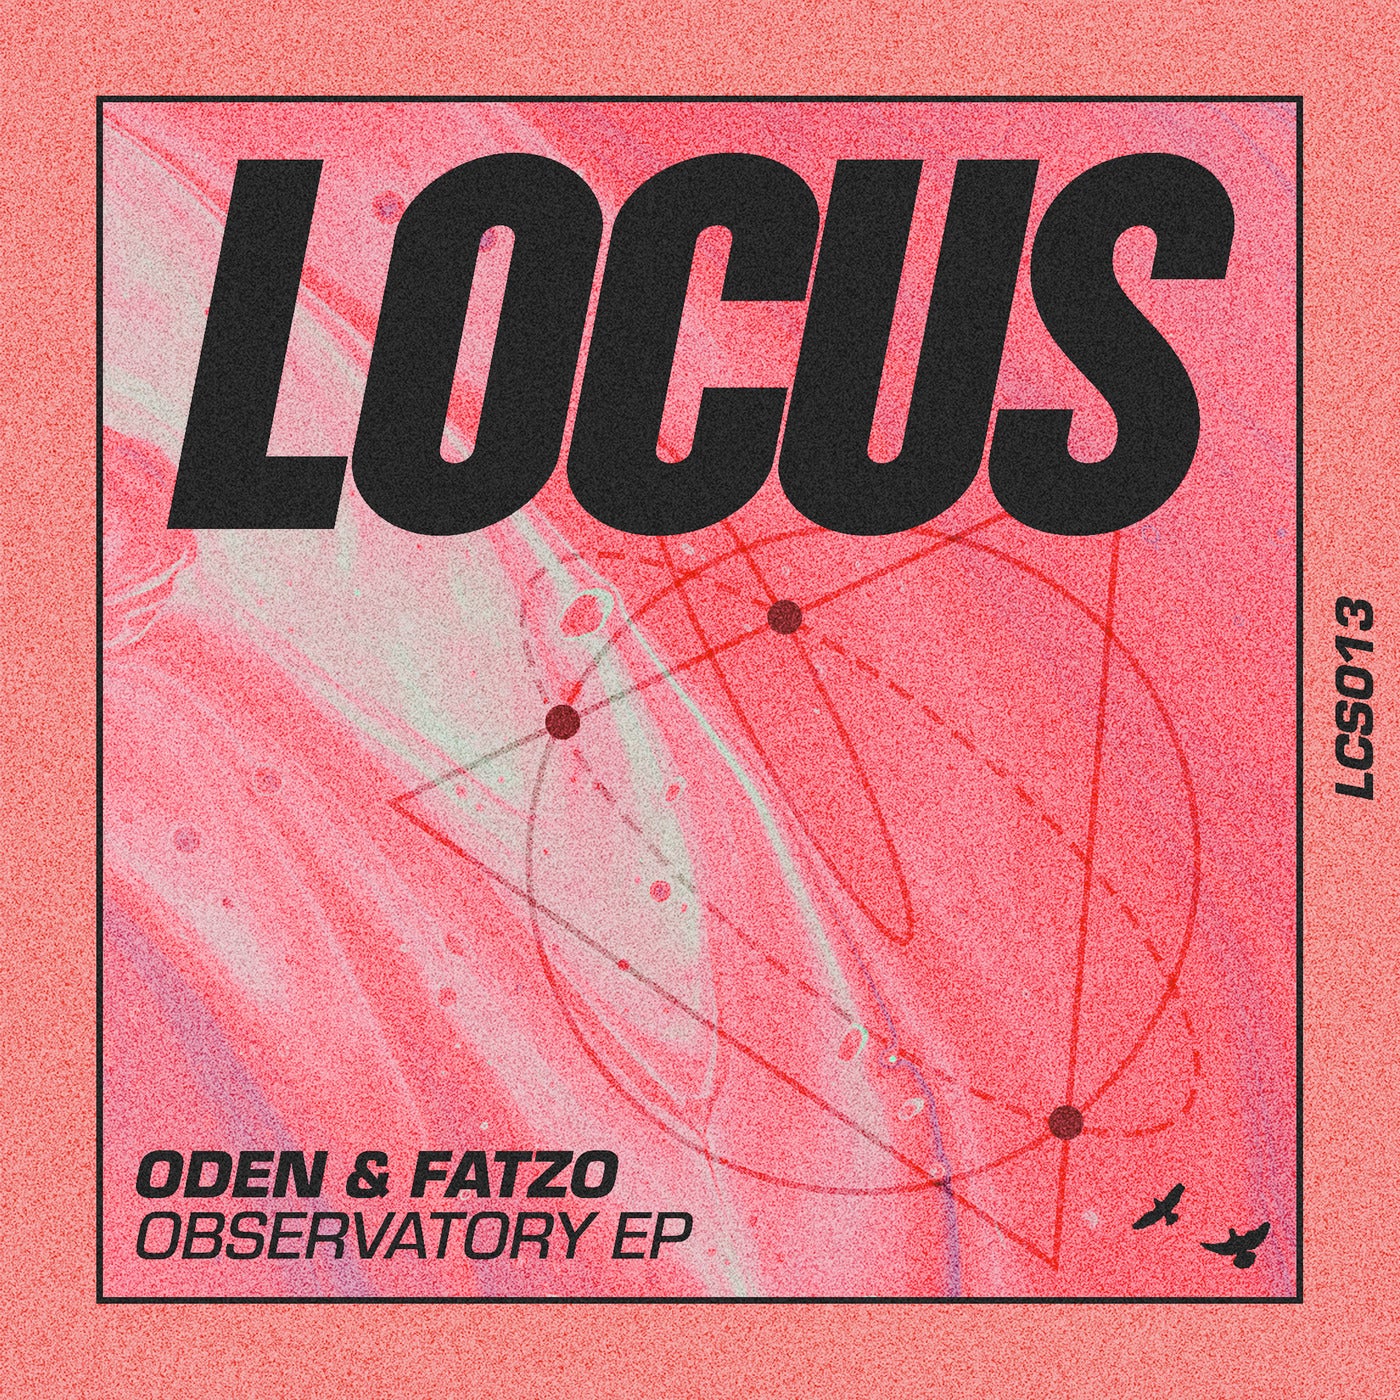 Oden & Fatzo – Observatory EP [LCS013]